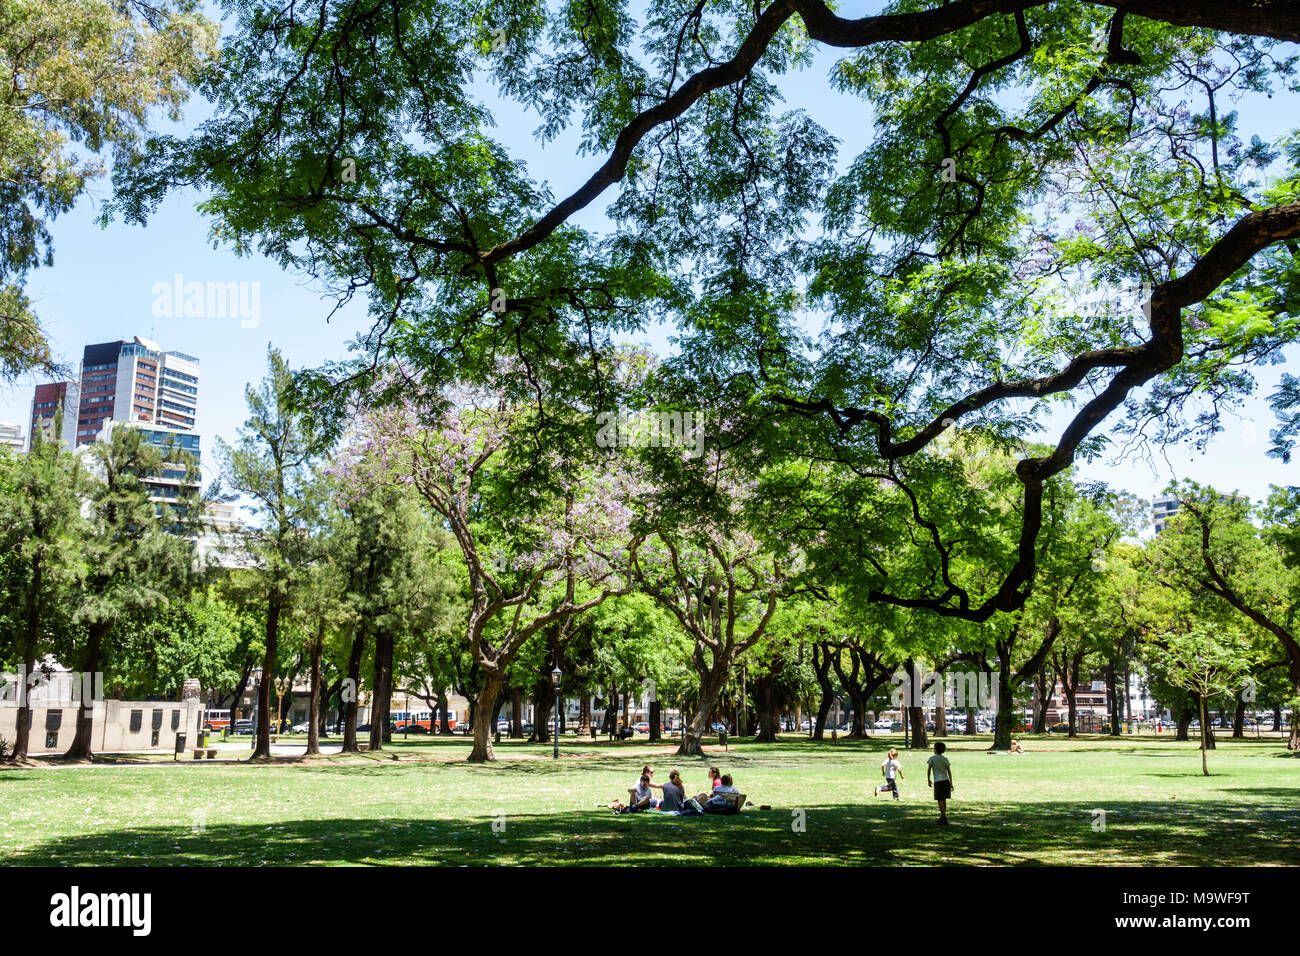 Buenos Aires Argentina,Palermo,Plaza Alemania,park,green space,trees,lawn,skyline,boy boys,male kid kids child children youngster,family families pare Stock Photo